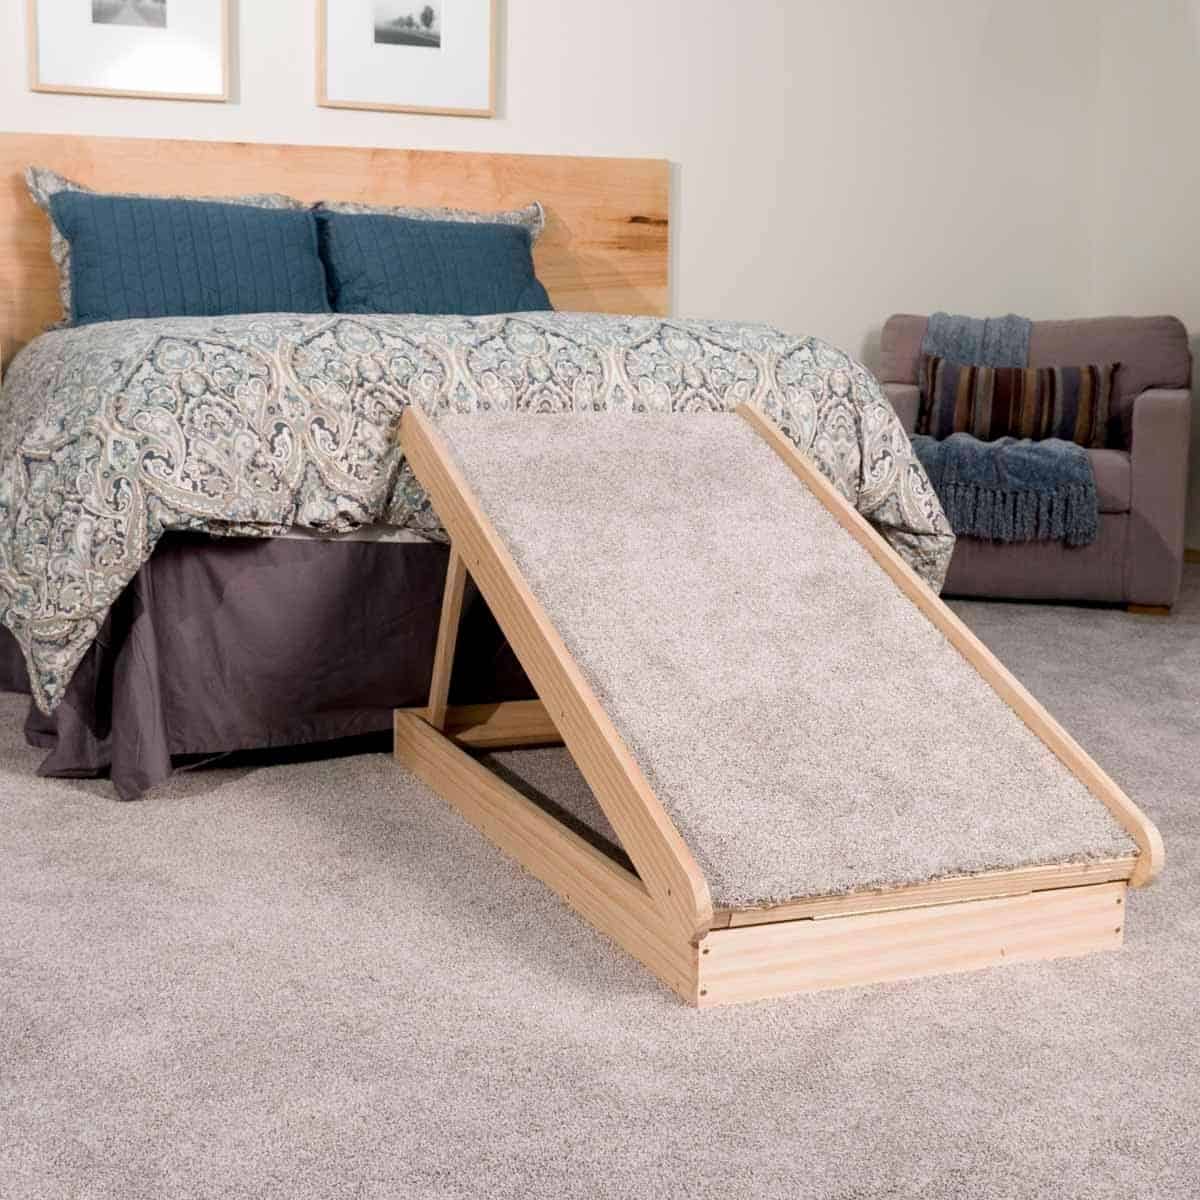 Inexpensive Collapsible Dog Ramp